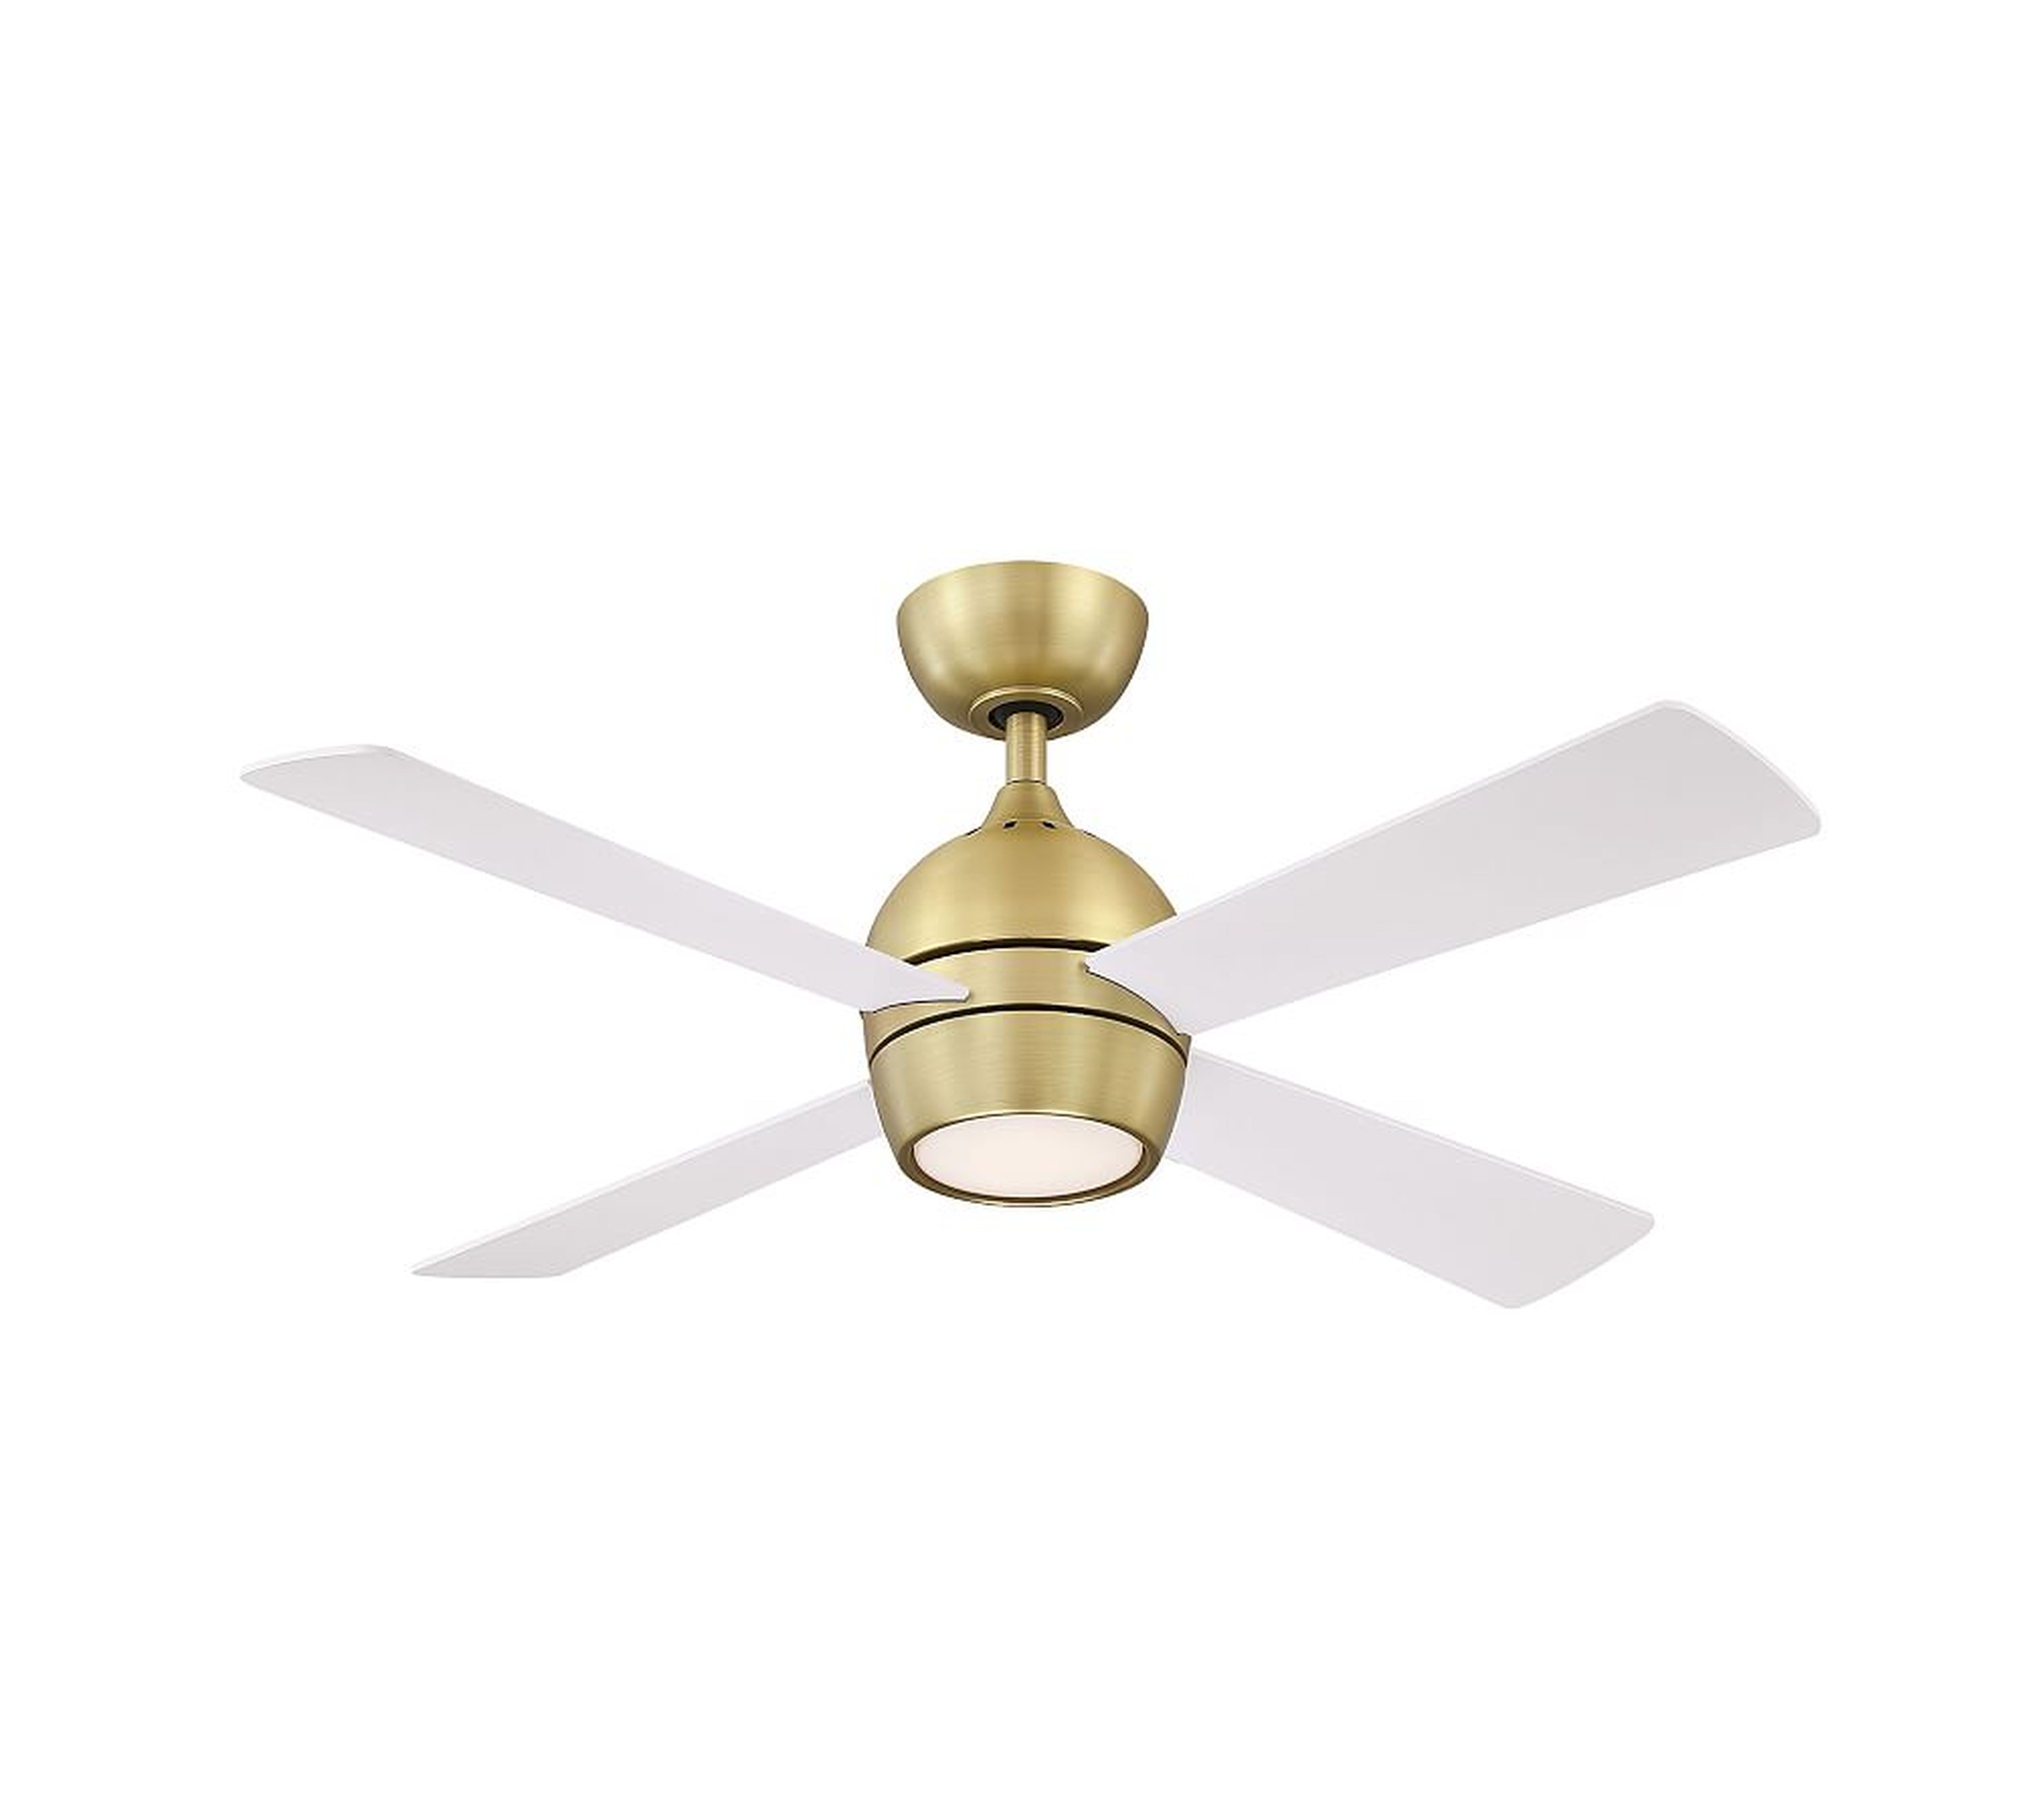 Kwad Ceiling Fan, Brushed Satin Brass With Matte White Blades, 44" - Pottery Barn